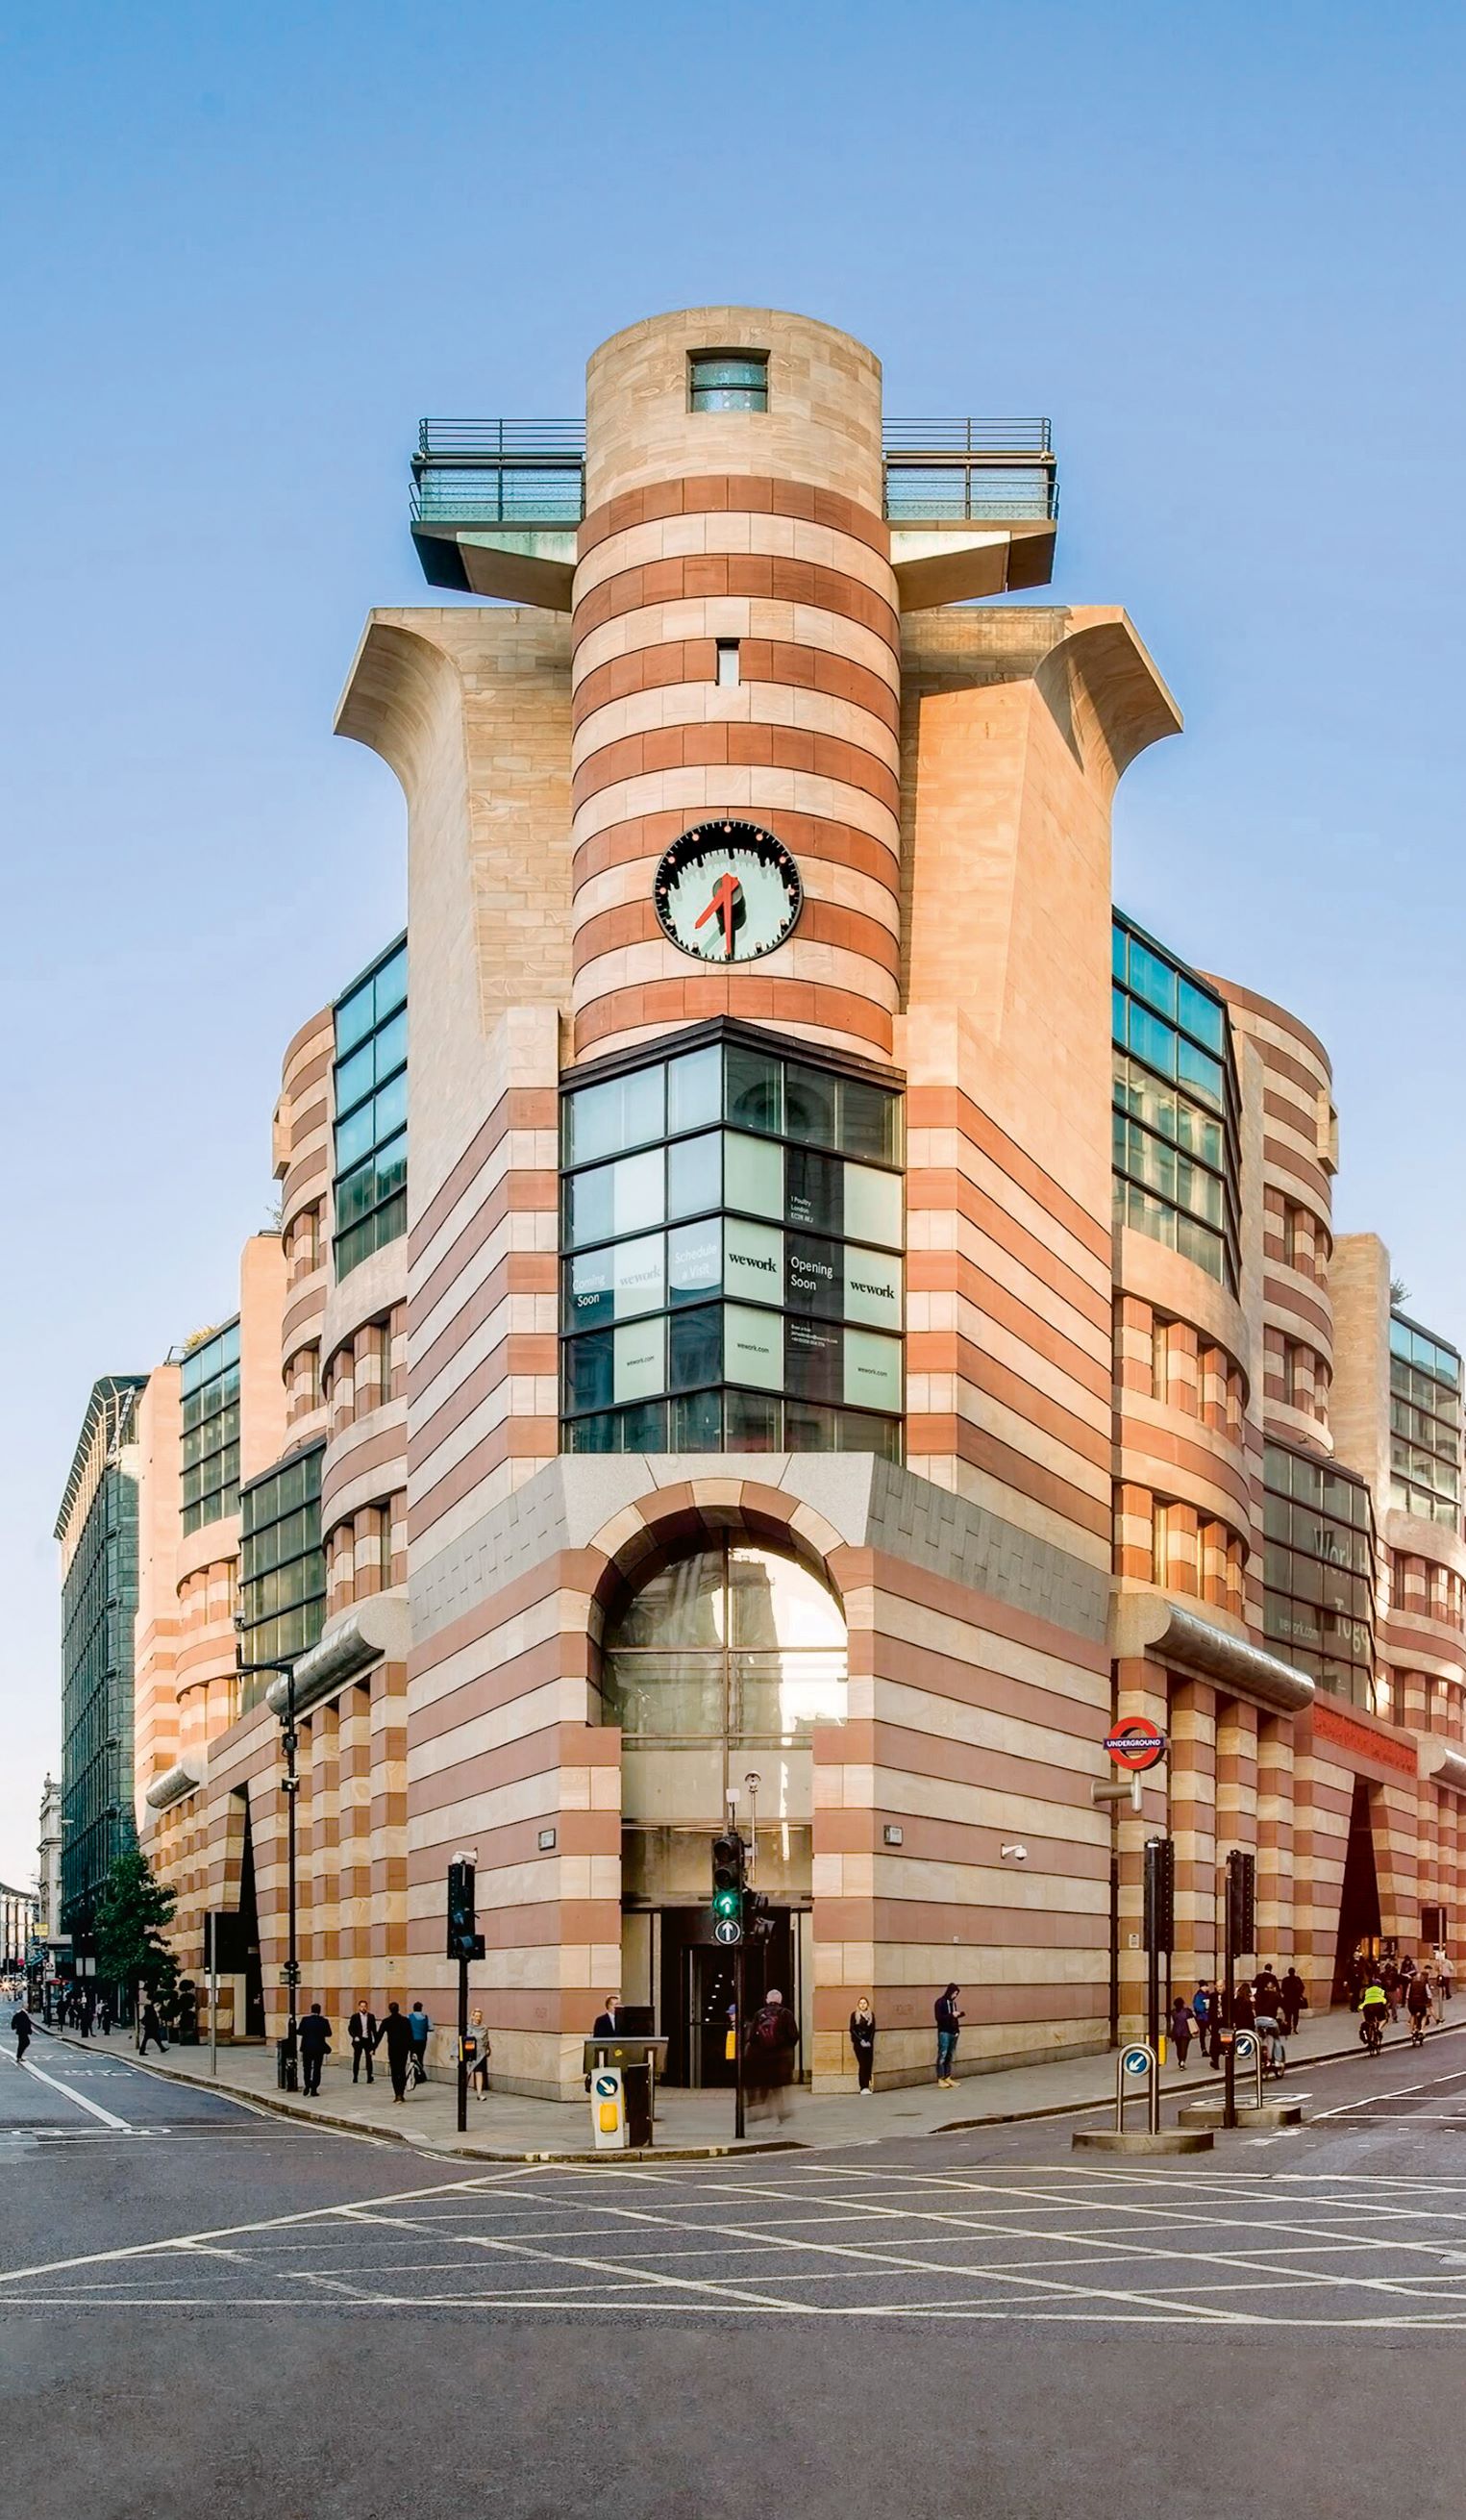 James Stirling, Michael Wilford and Associates: Number 1 Poultry, London, England, UK, 1997